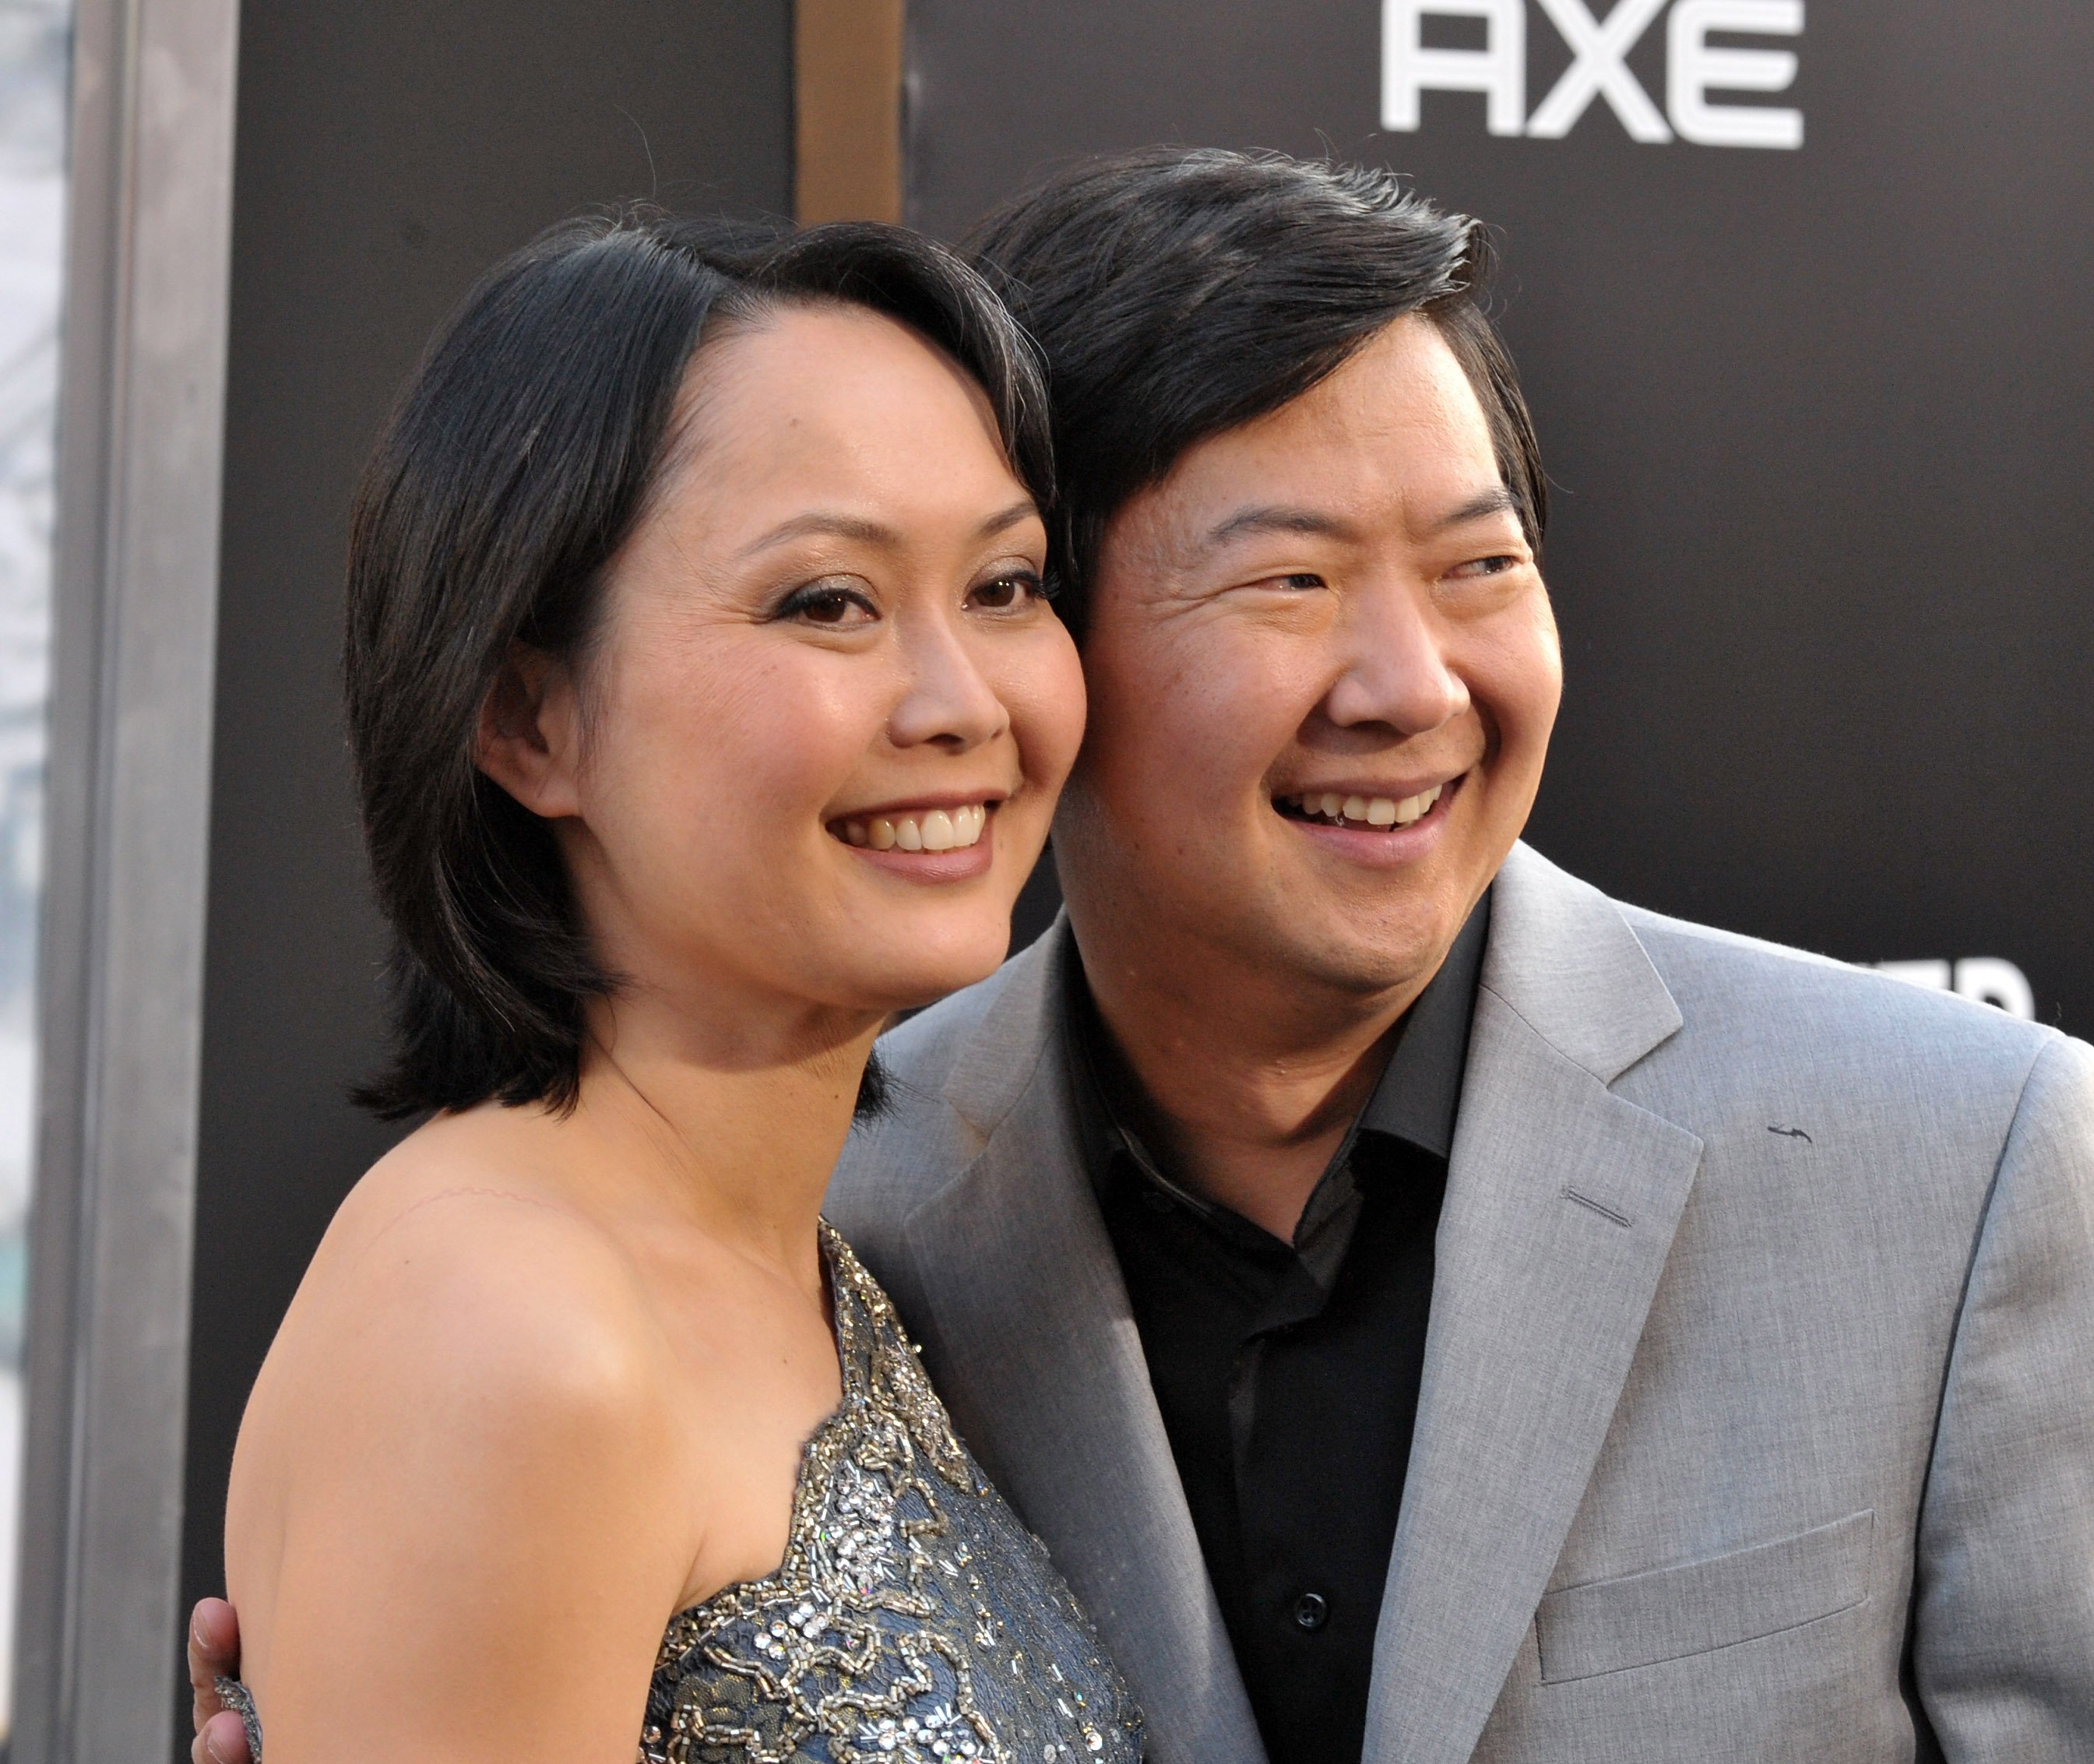 Tran and Ken Jeong at "The Hangover Part II" Los Angeles premiere on May 19, 2011 in Hollywood, California. | Photo: Getty Images